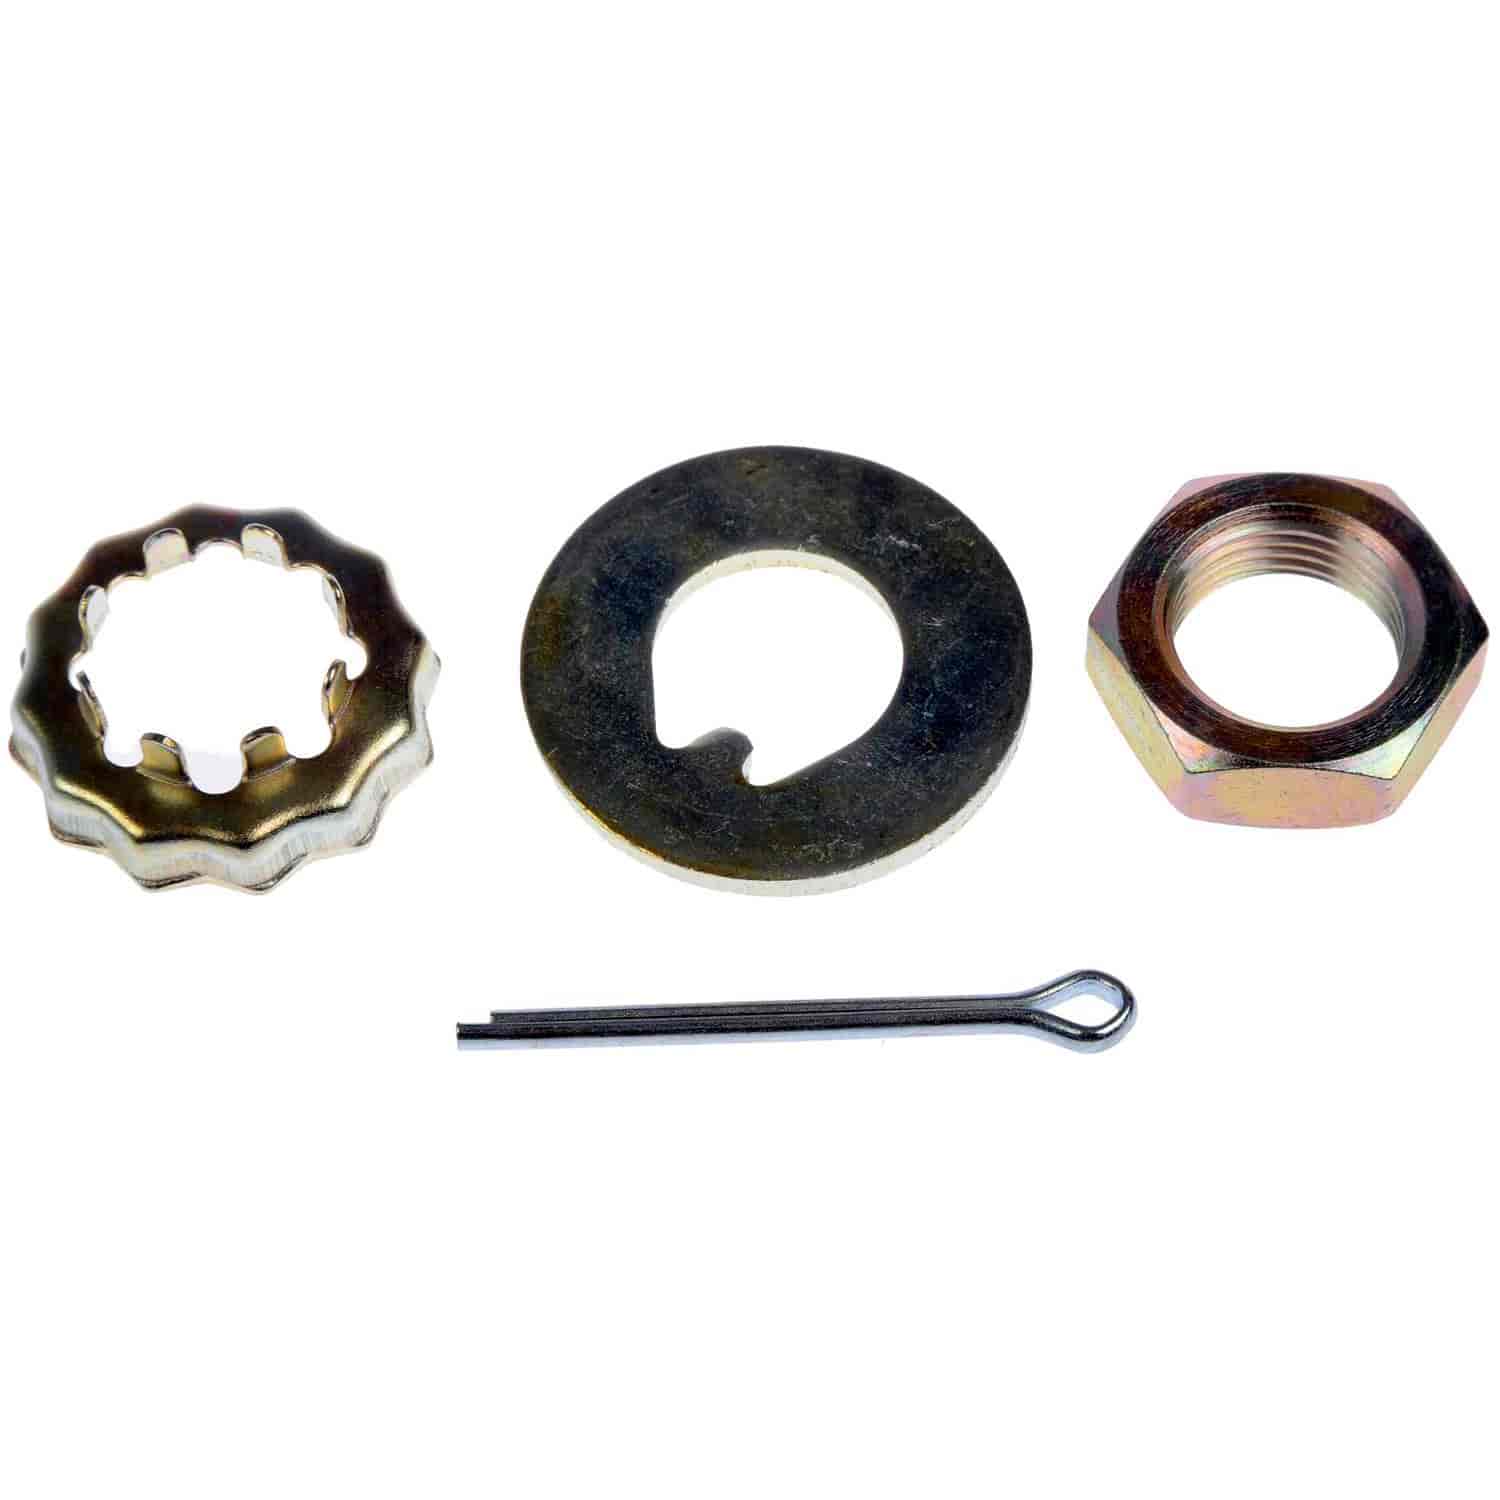 Spindle Nut Kit 1/2-20 Contents Nut Kits Washer Retainer and Cotter Pin